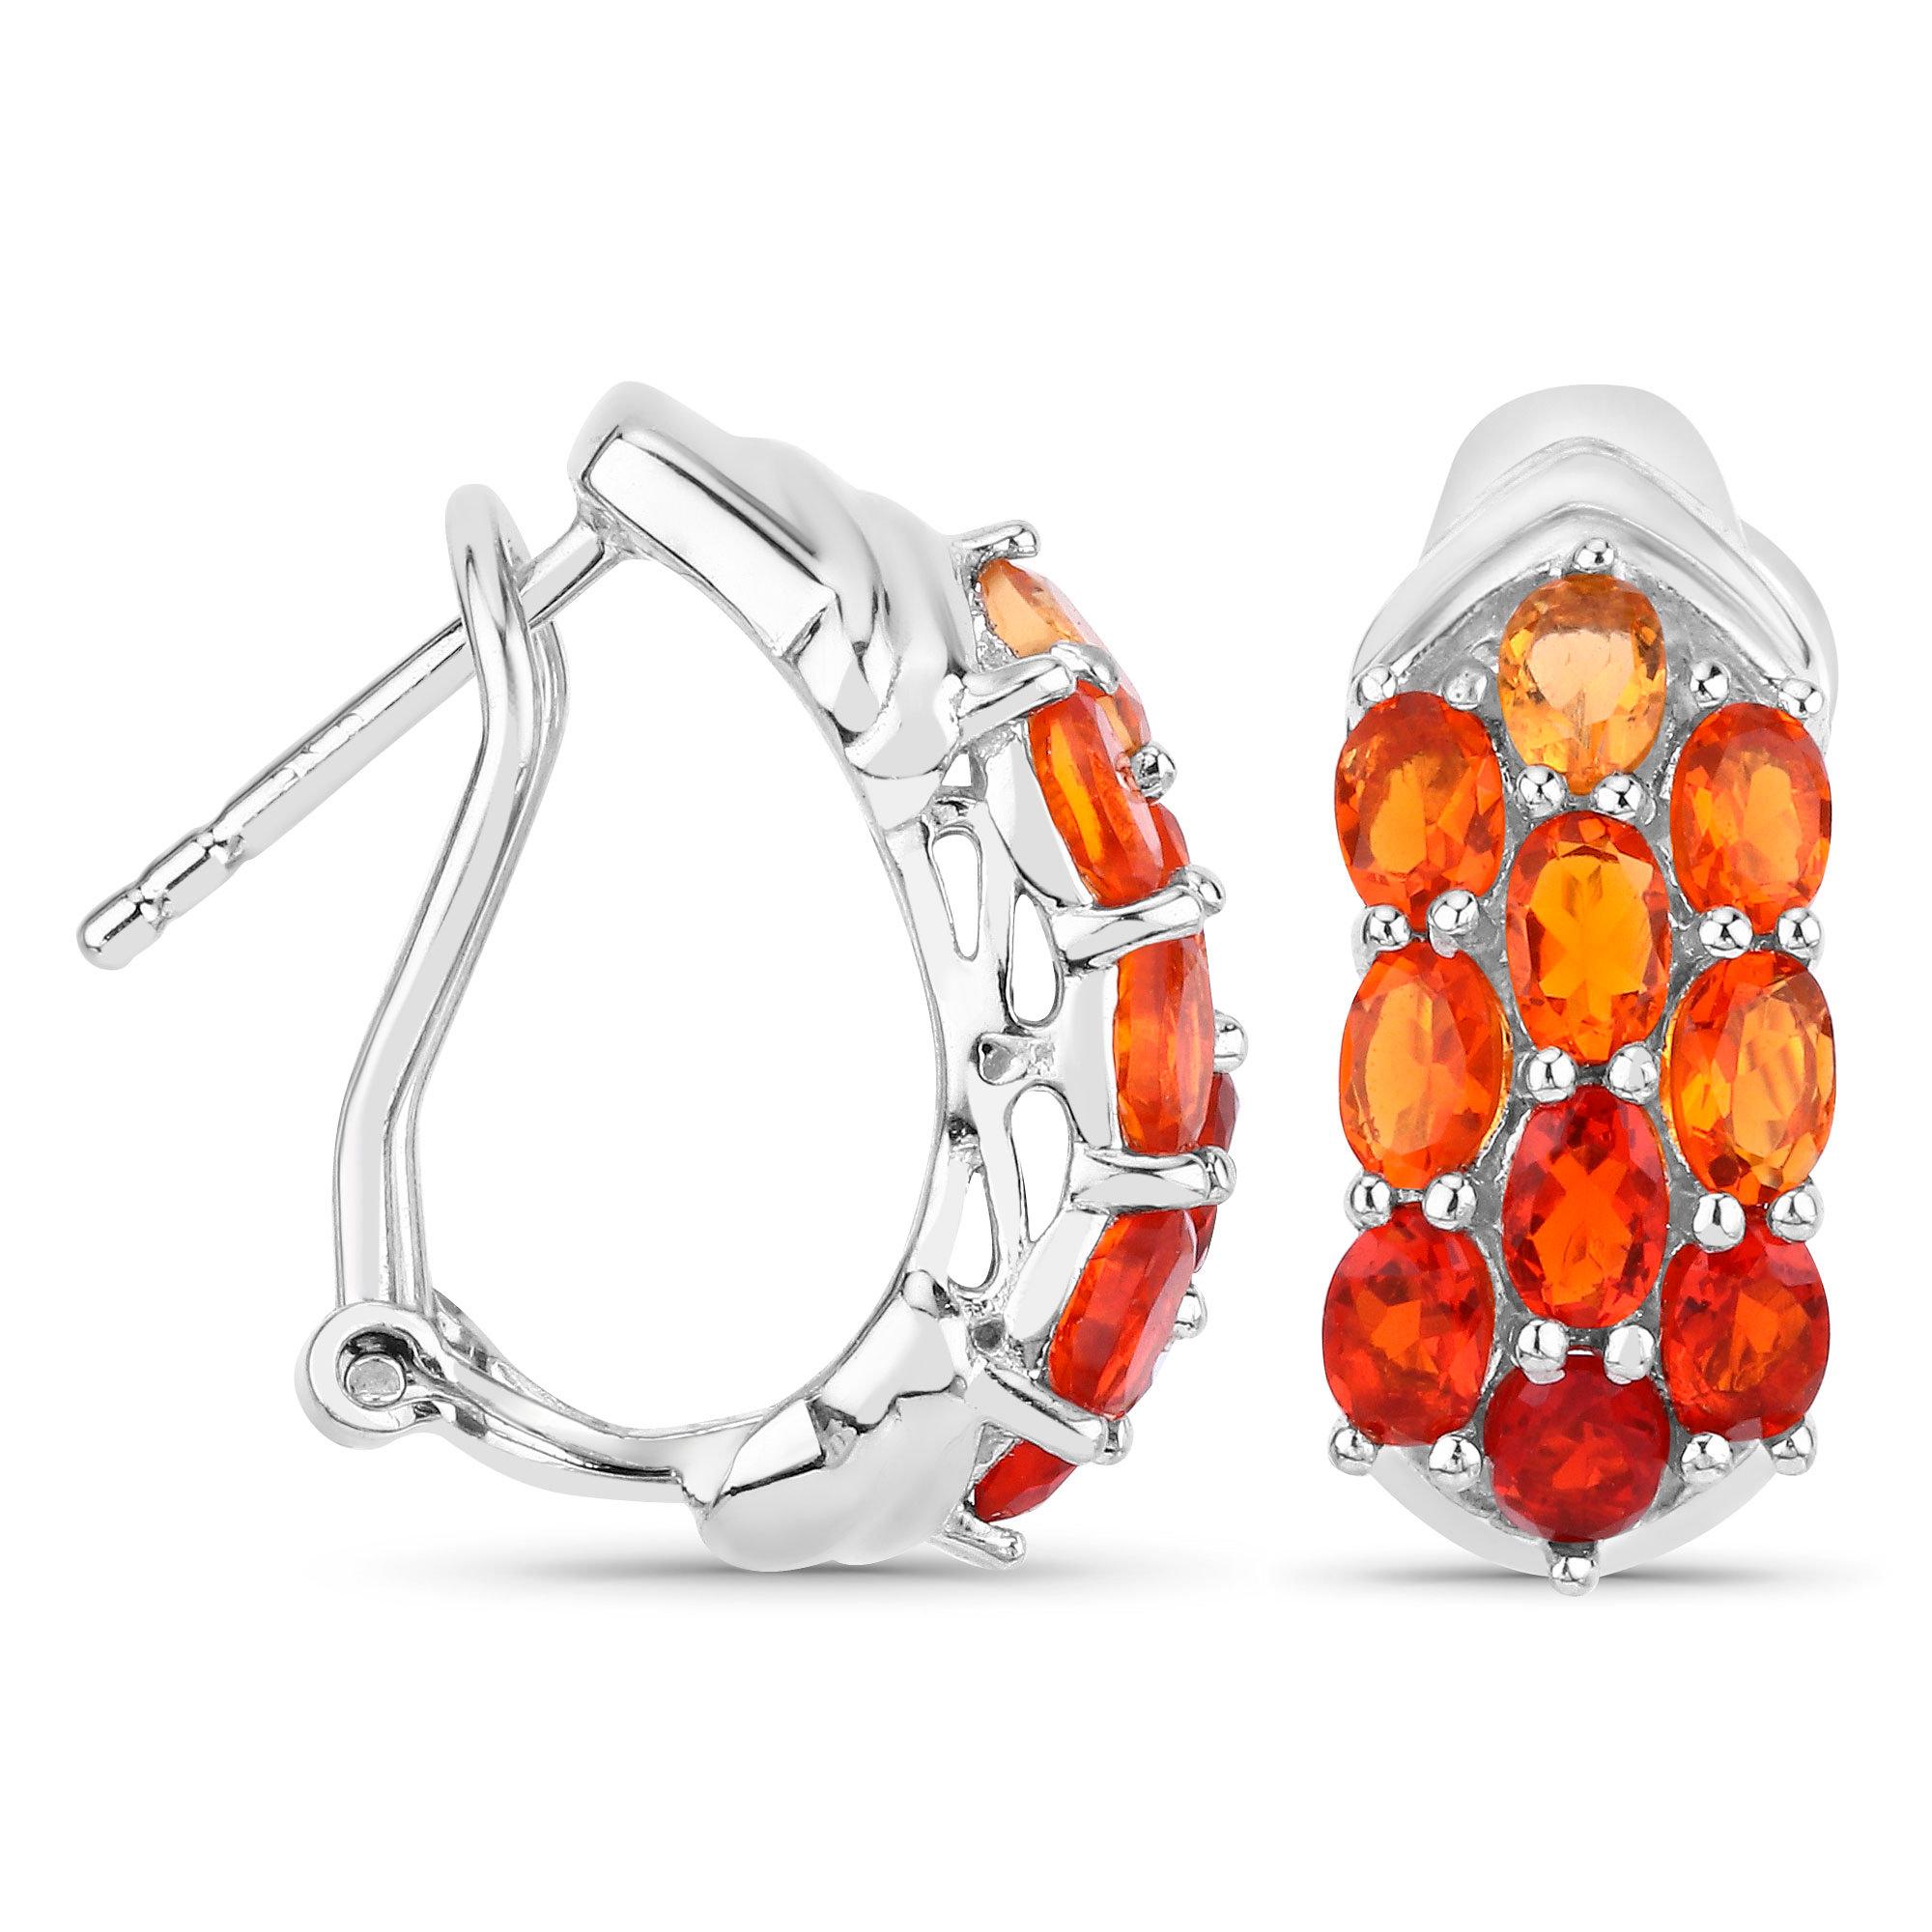 Oval Cut Natural Fire Opal Cluster Earrings 2.4 Carats Sterling Silver For Sale